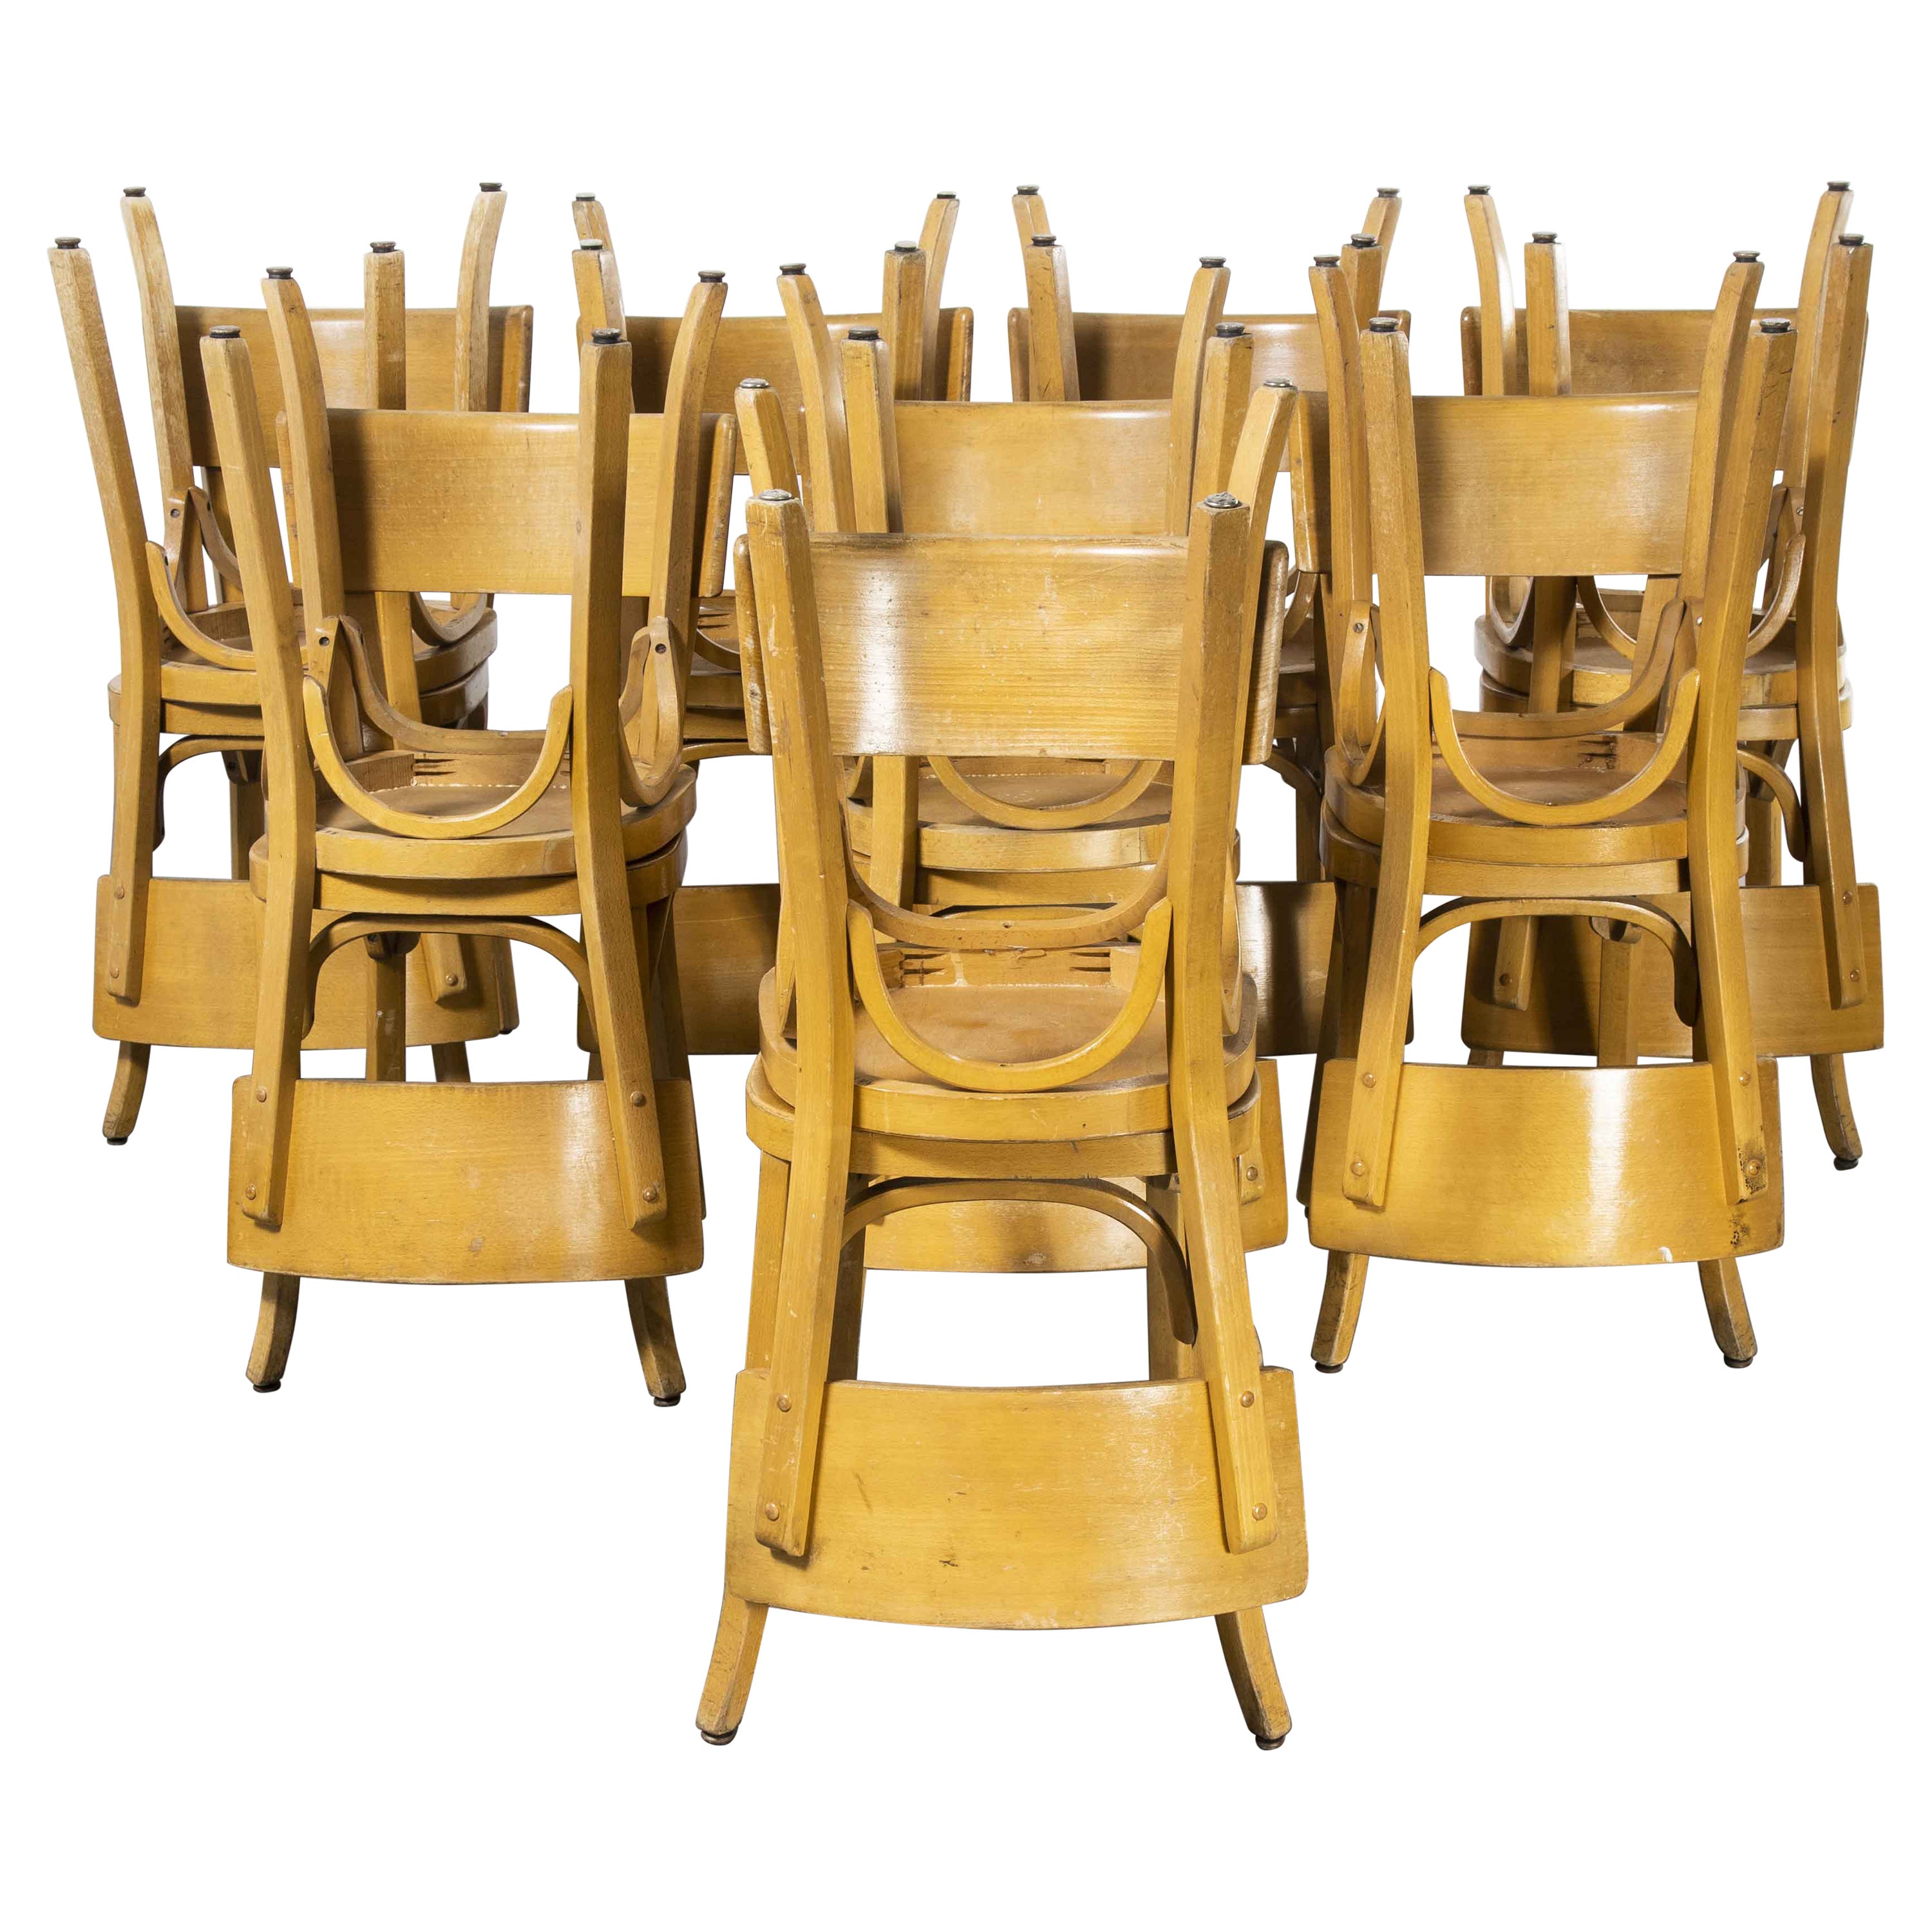 1950's French Baumann Blonde Beech Bentwood Dining Chairs, Various Qty Available For Sale